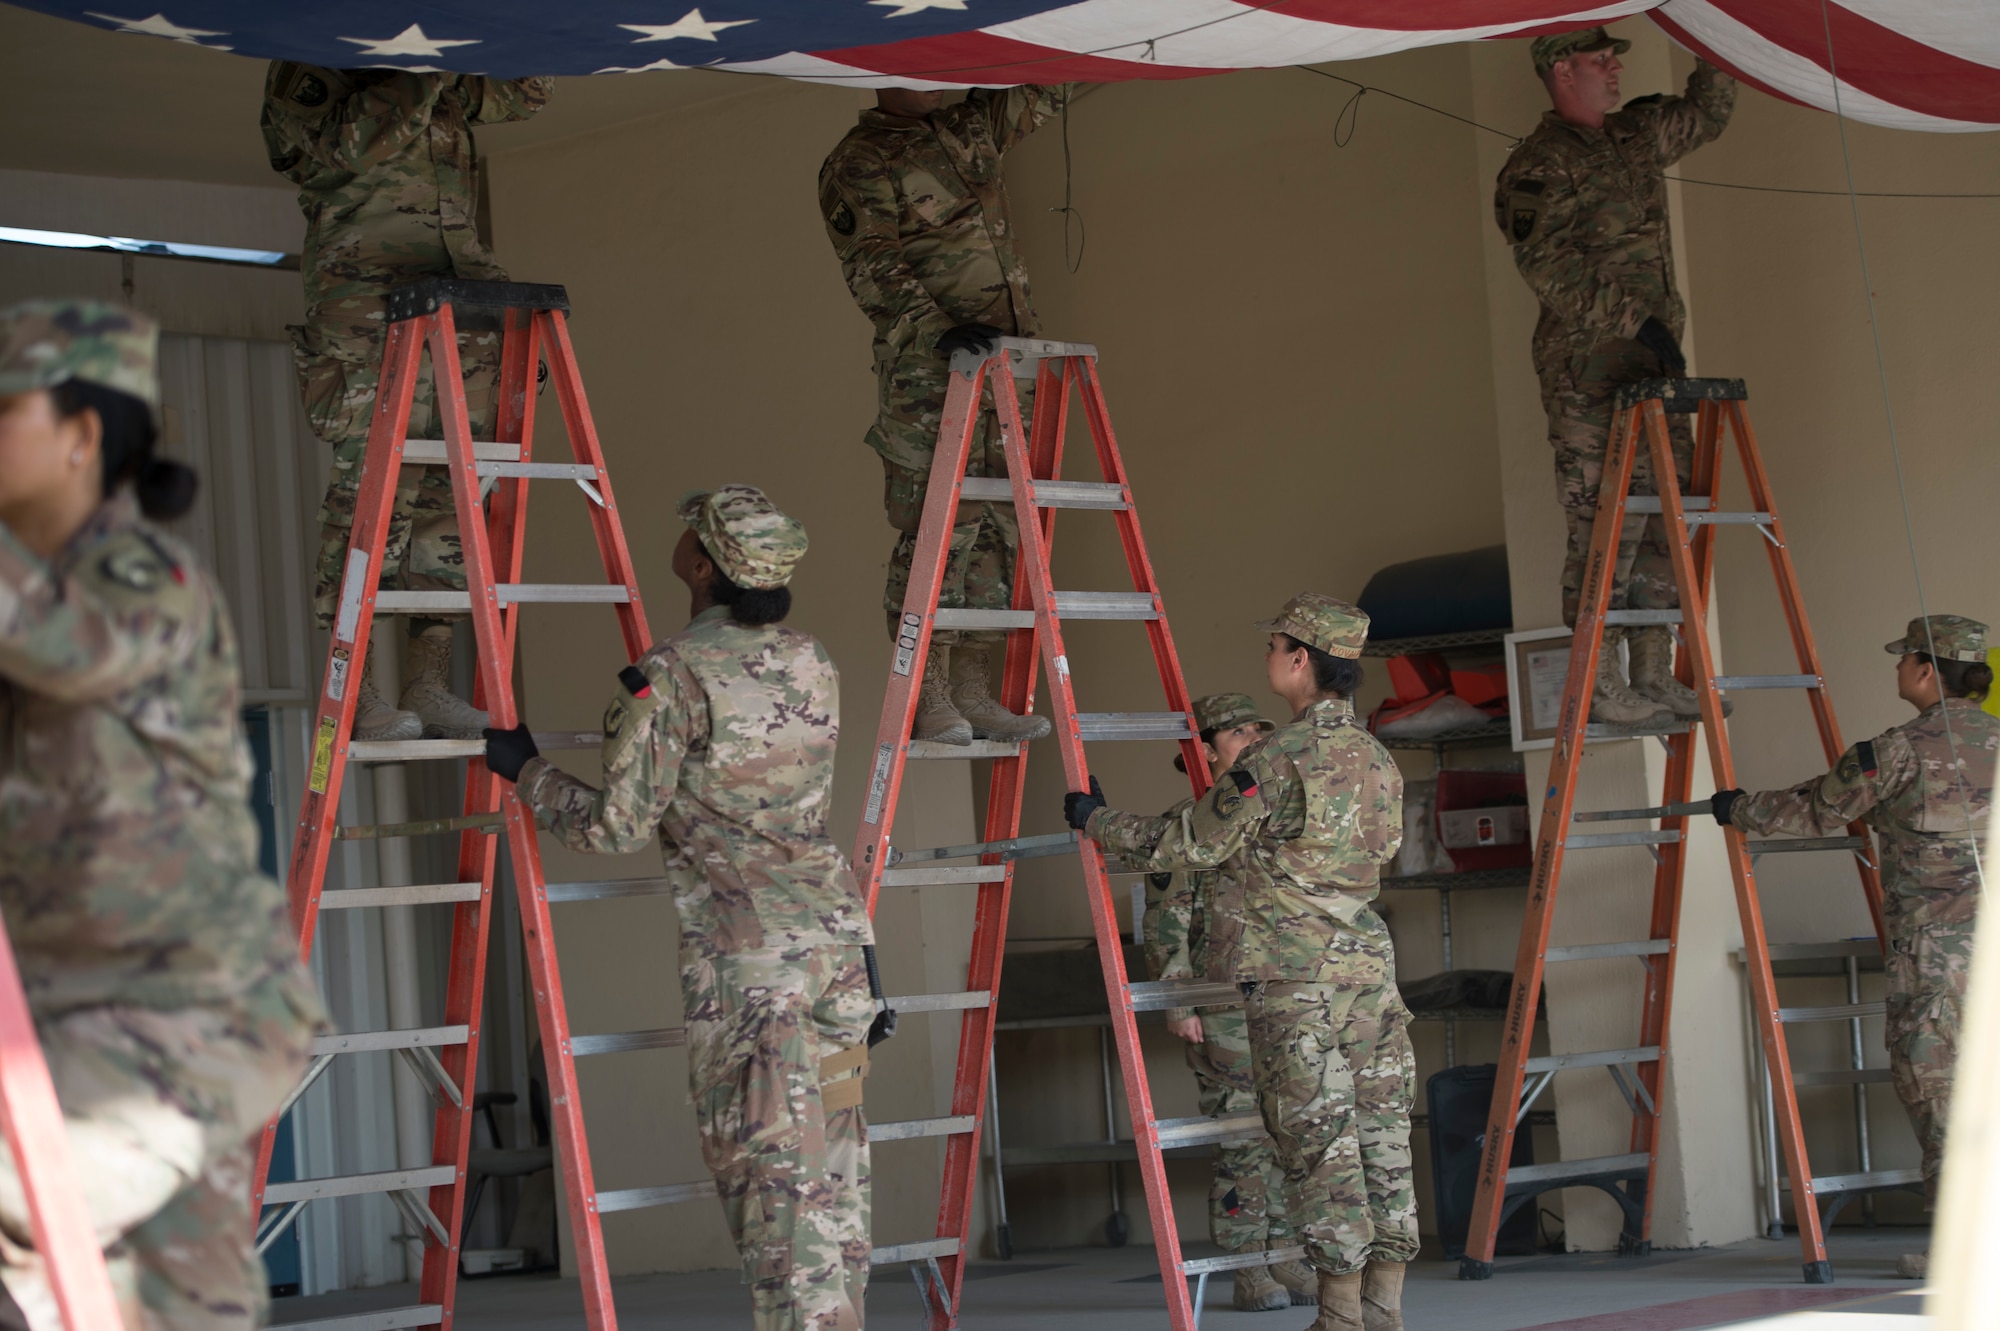 On Veterans Day, Col. Robert York, commander of the 455th Expeditionary Medical Group at Bagram, led a group of Airmen in a ceremony to remove and replace the large flag that hangs at the Craig Joint Theater Hospital Nov. 11.